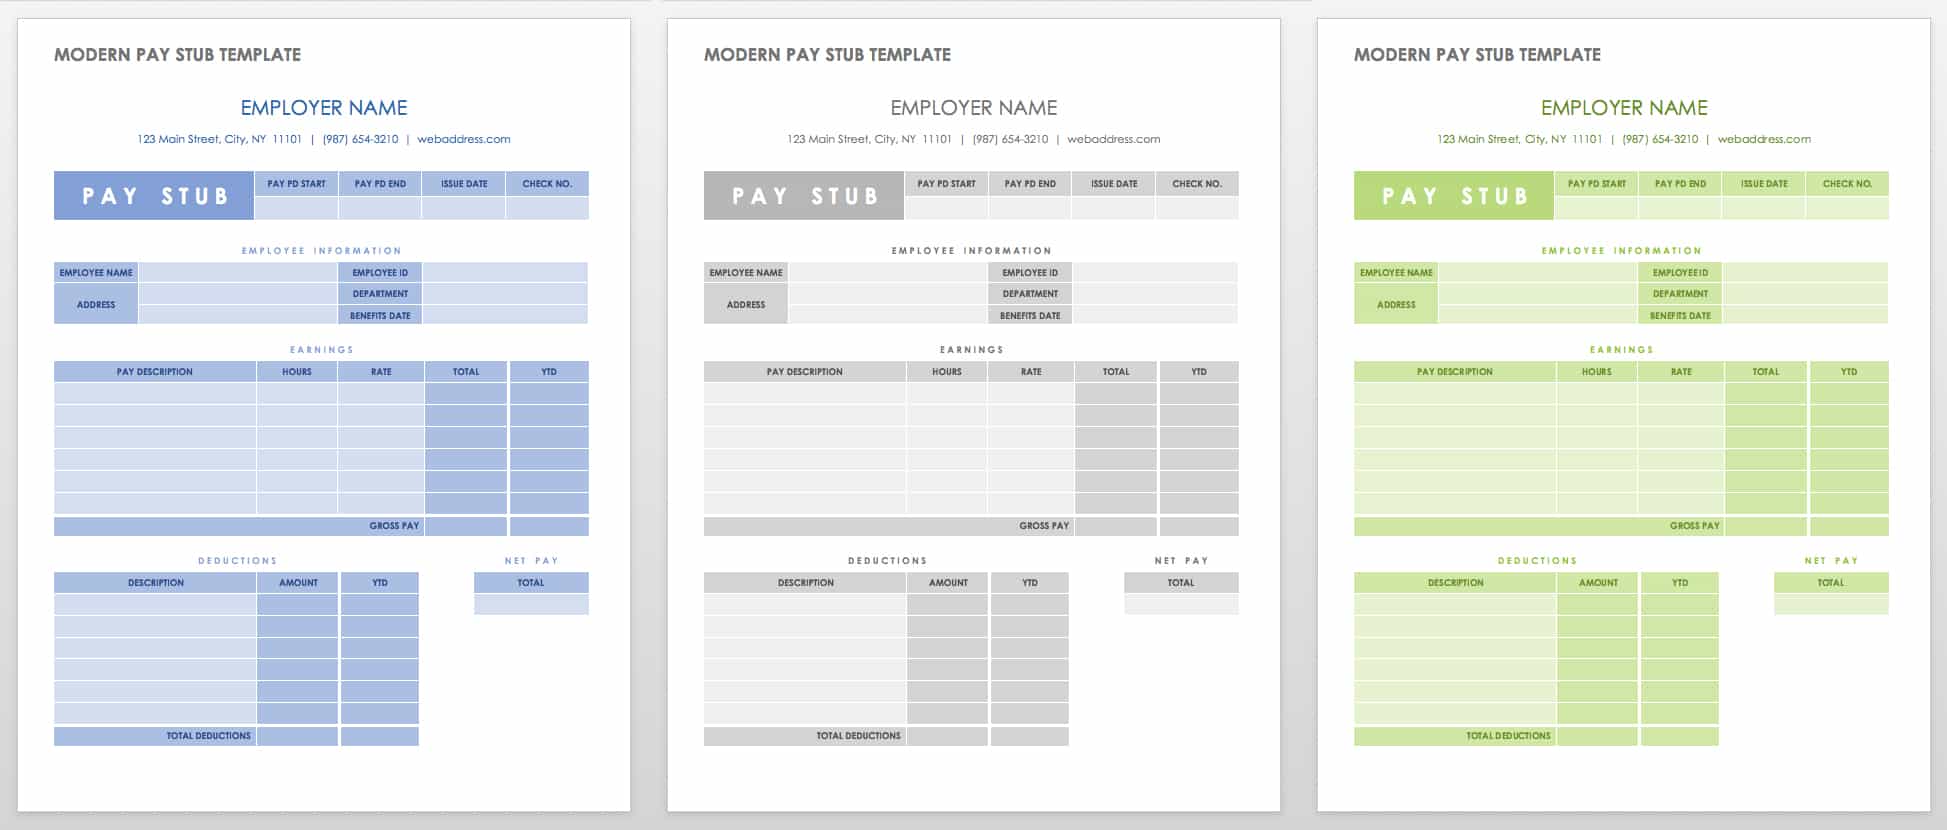 Free Pay Stub Templates   Smartsheet Throughout Blank Pay Stub Template Word